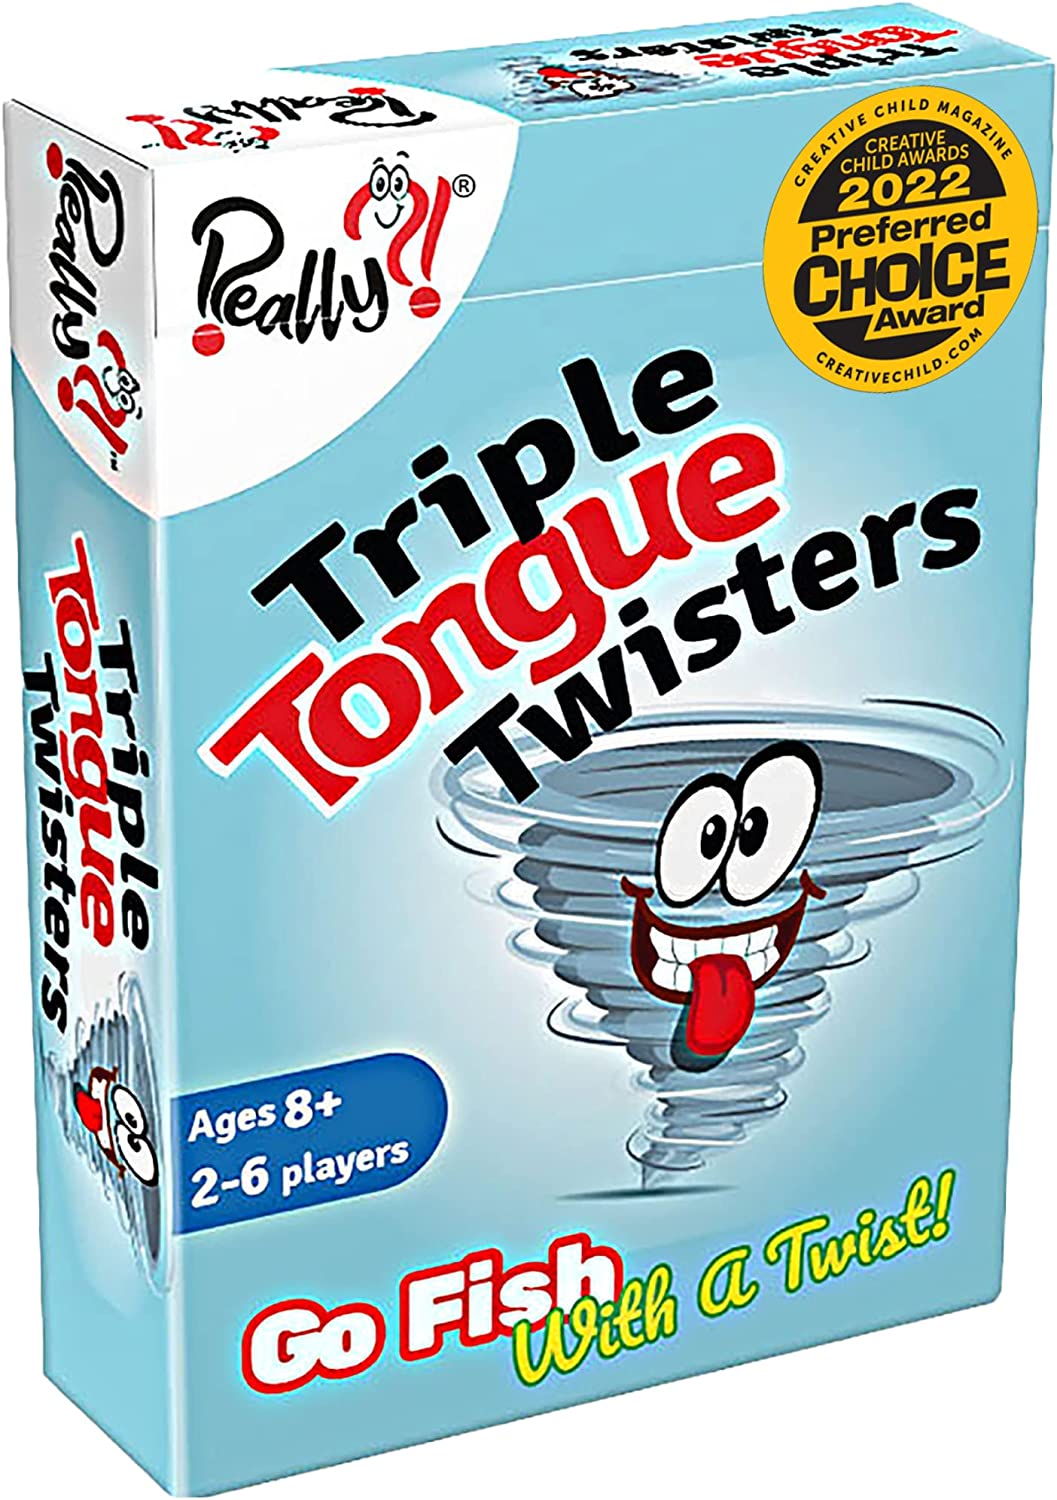 A card game box is shown. It says Triple Tongue Twisters in red and black letters. There is a cartoon tornado shown that is sticking out his tongue (fun card games)